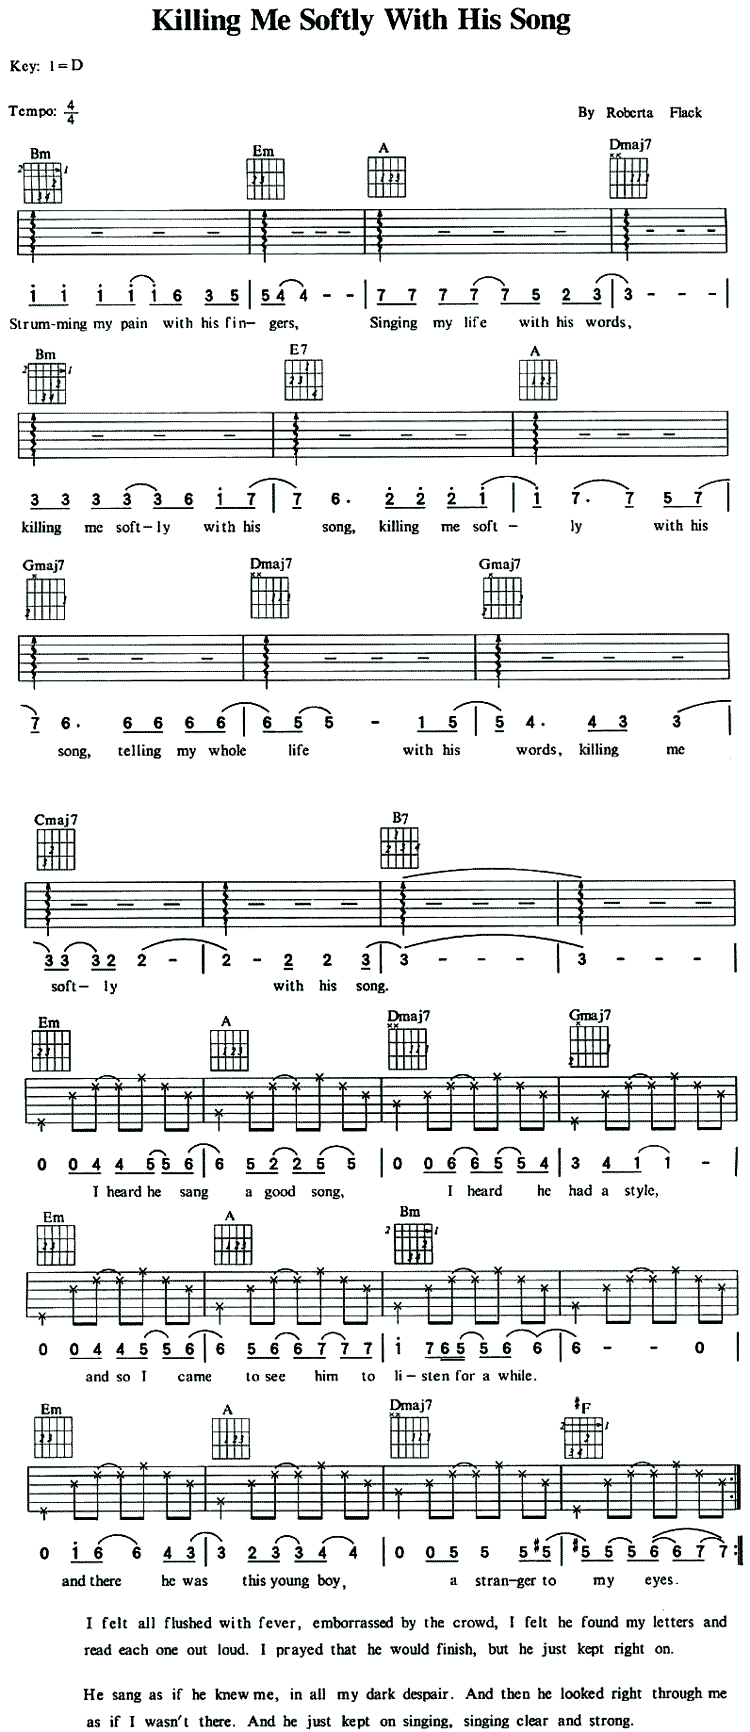 Killing Me Softly With His Song by Fugees Guitar Sheet Music Free